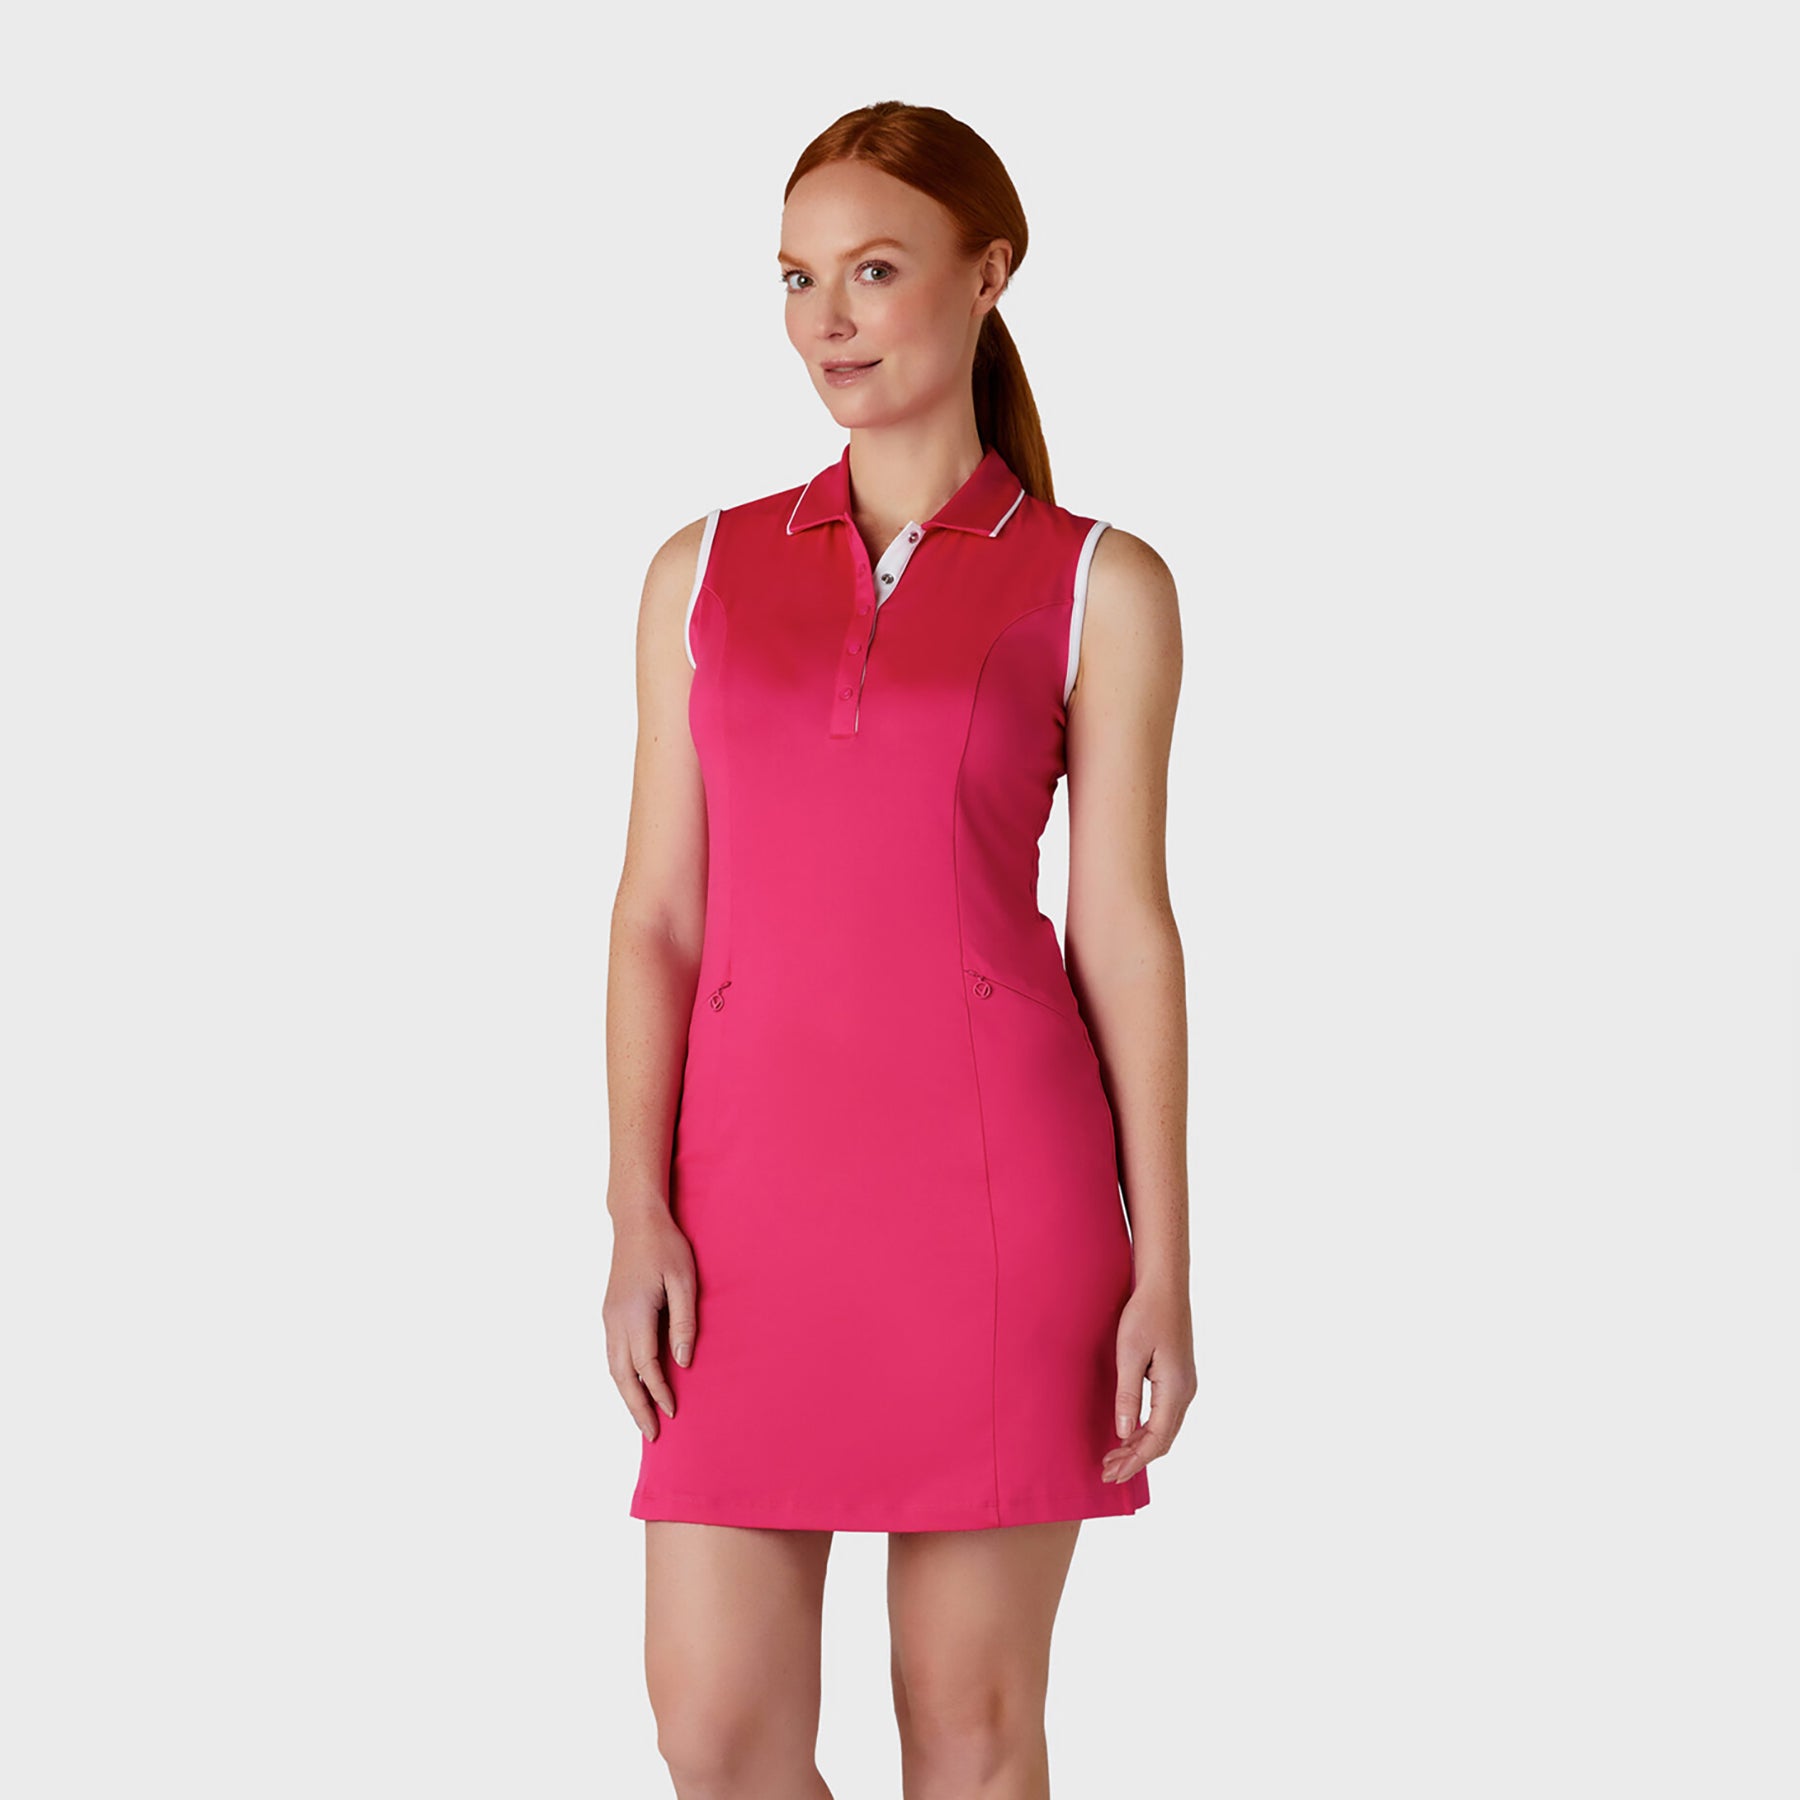 Callaway Ladies Sleeveless Pink Peacock Golf Dress with White Contrast Trim